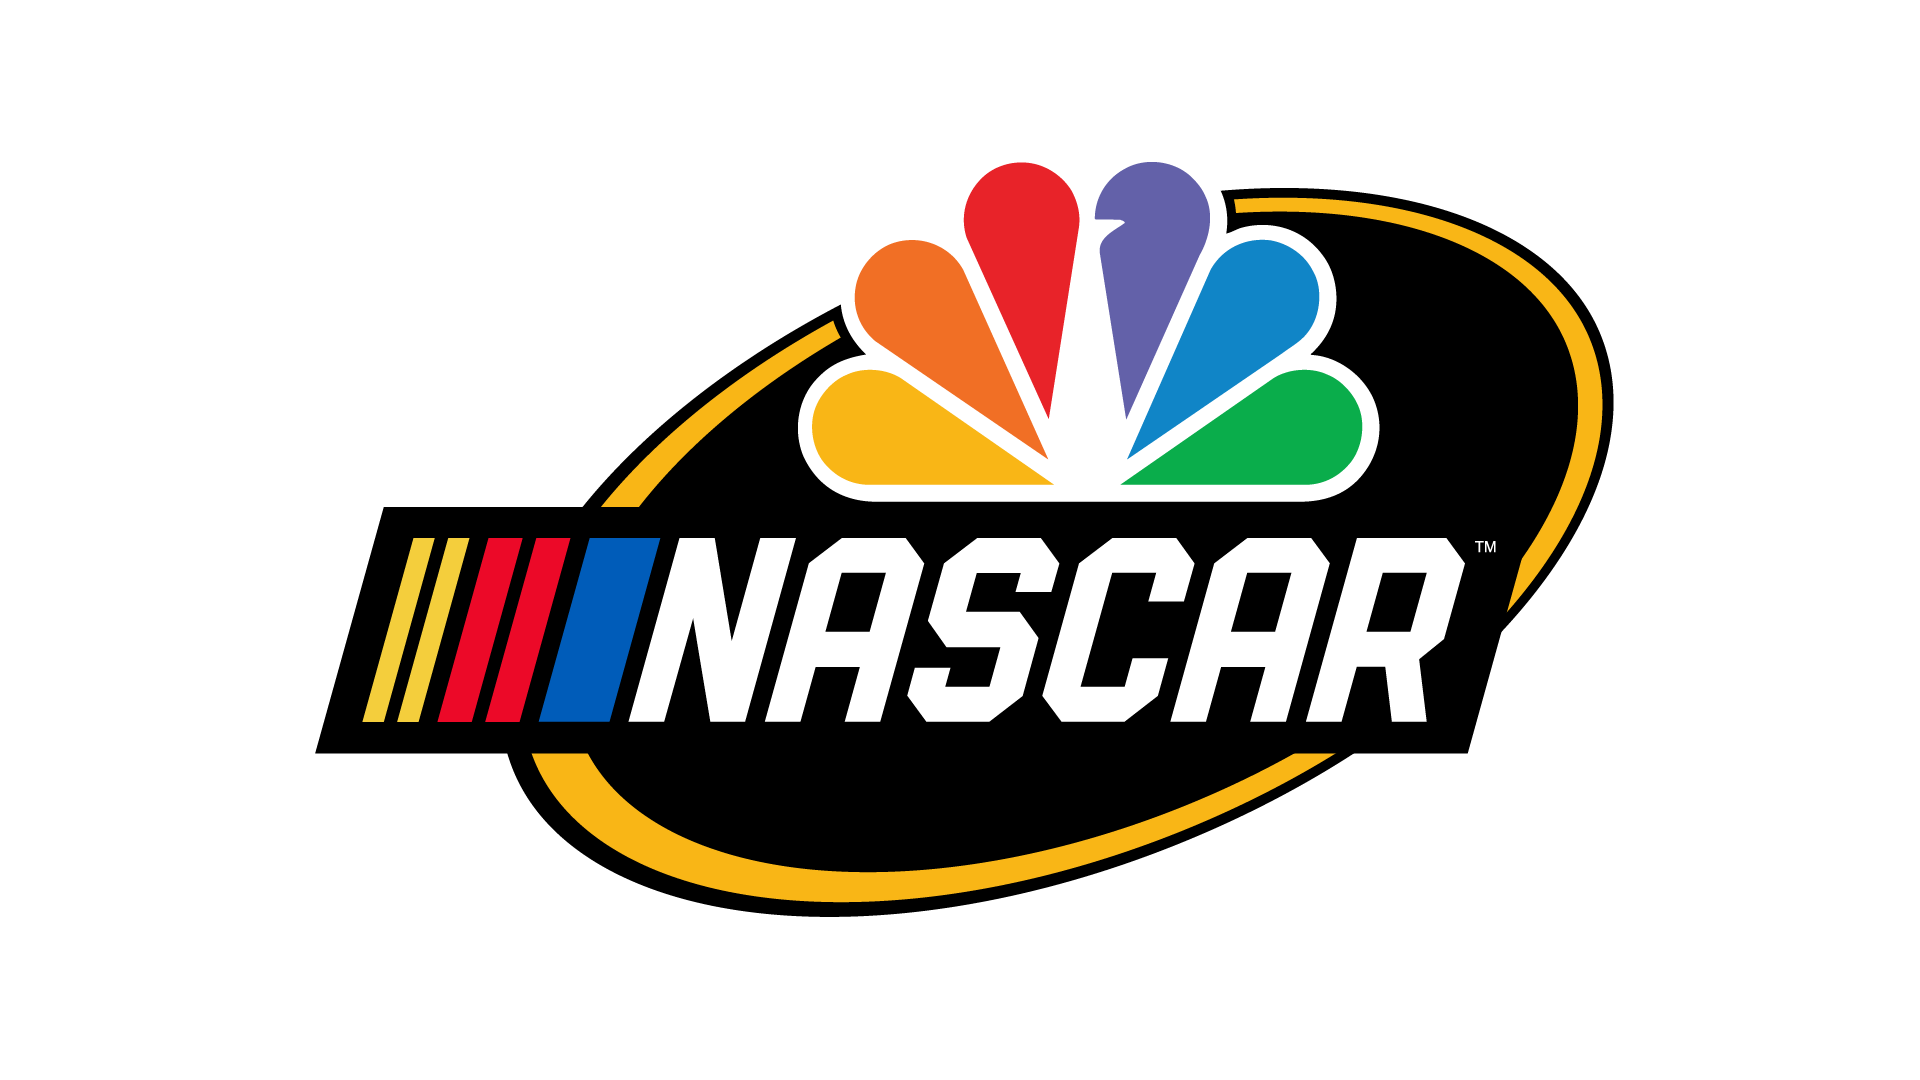 NBC And NASCAR Are Launching a New ‘TrackPass on NBC Sports Gold’ Streaming Service